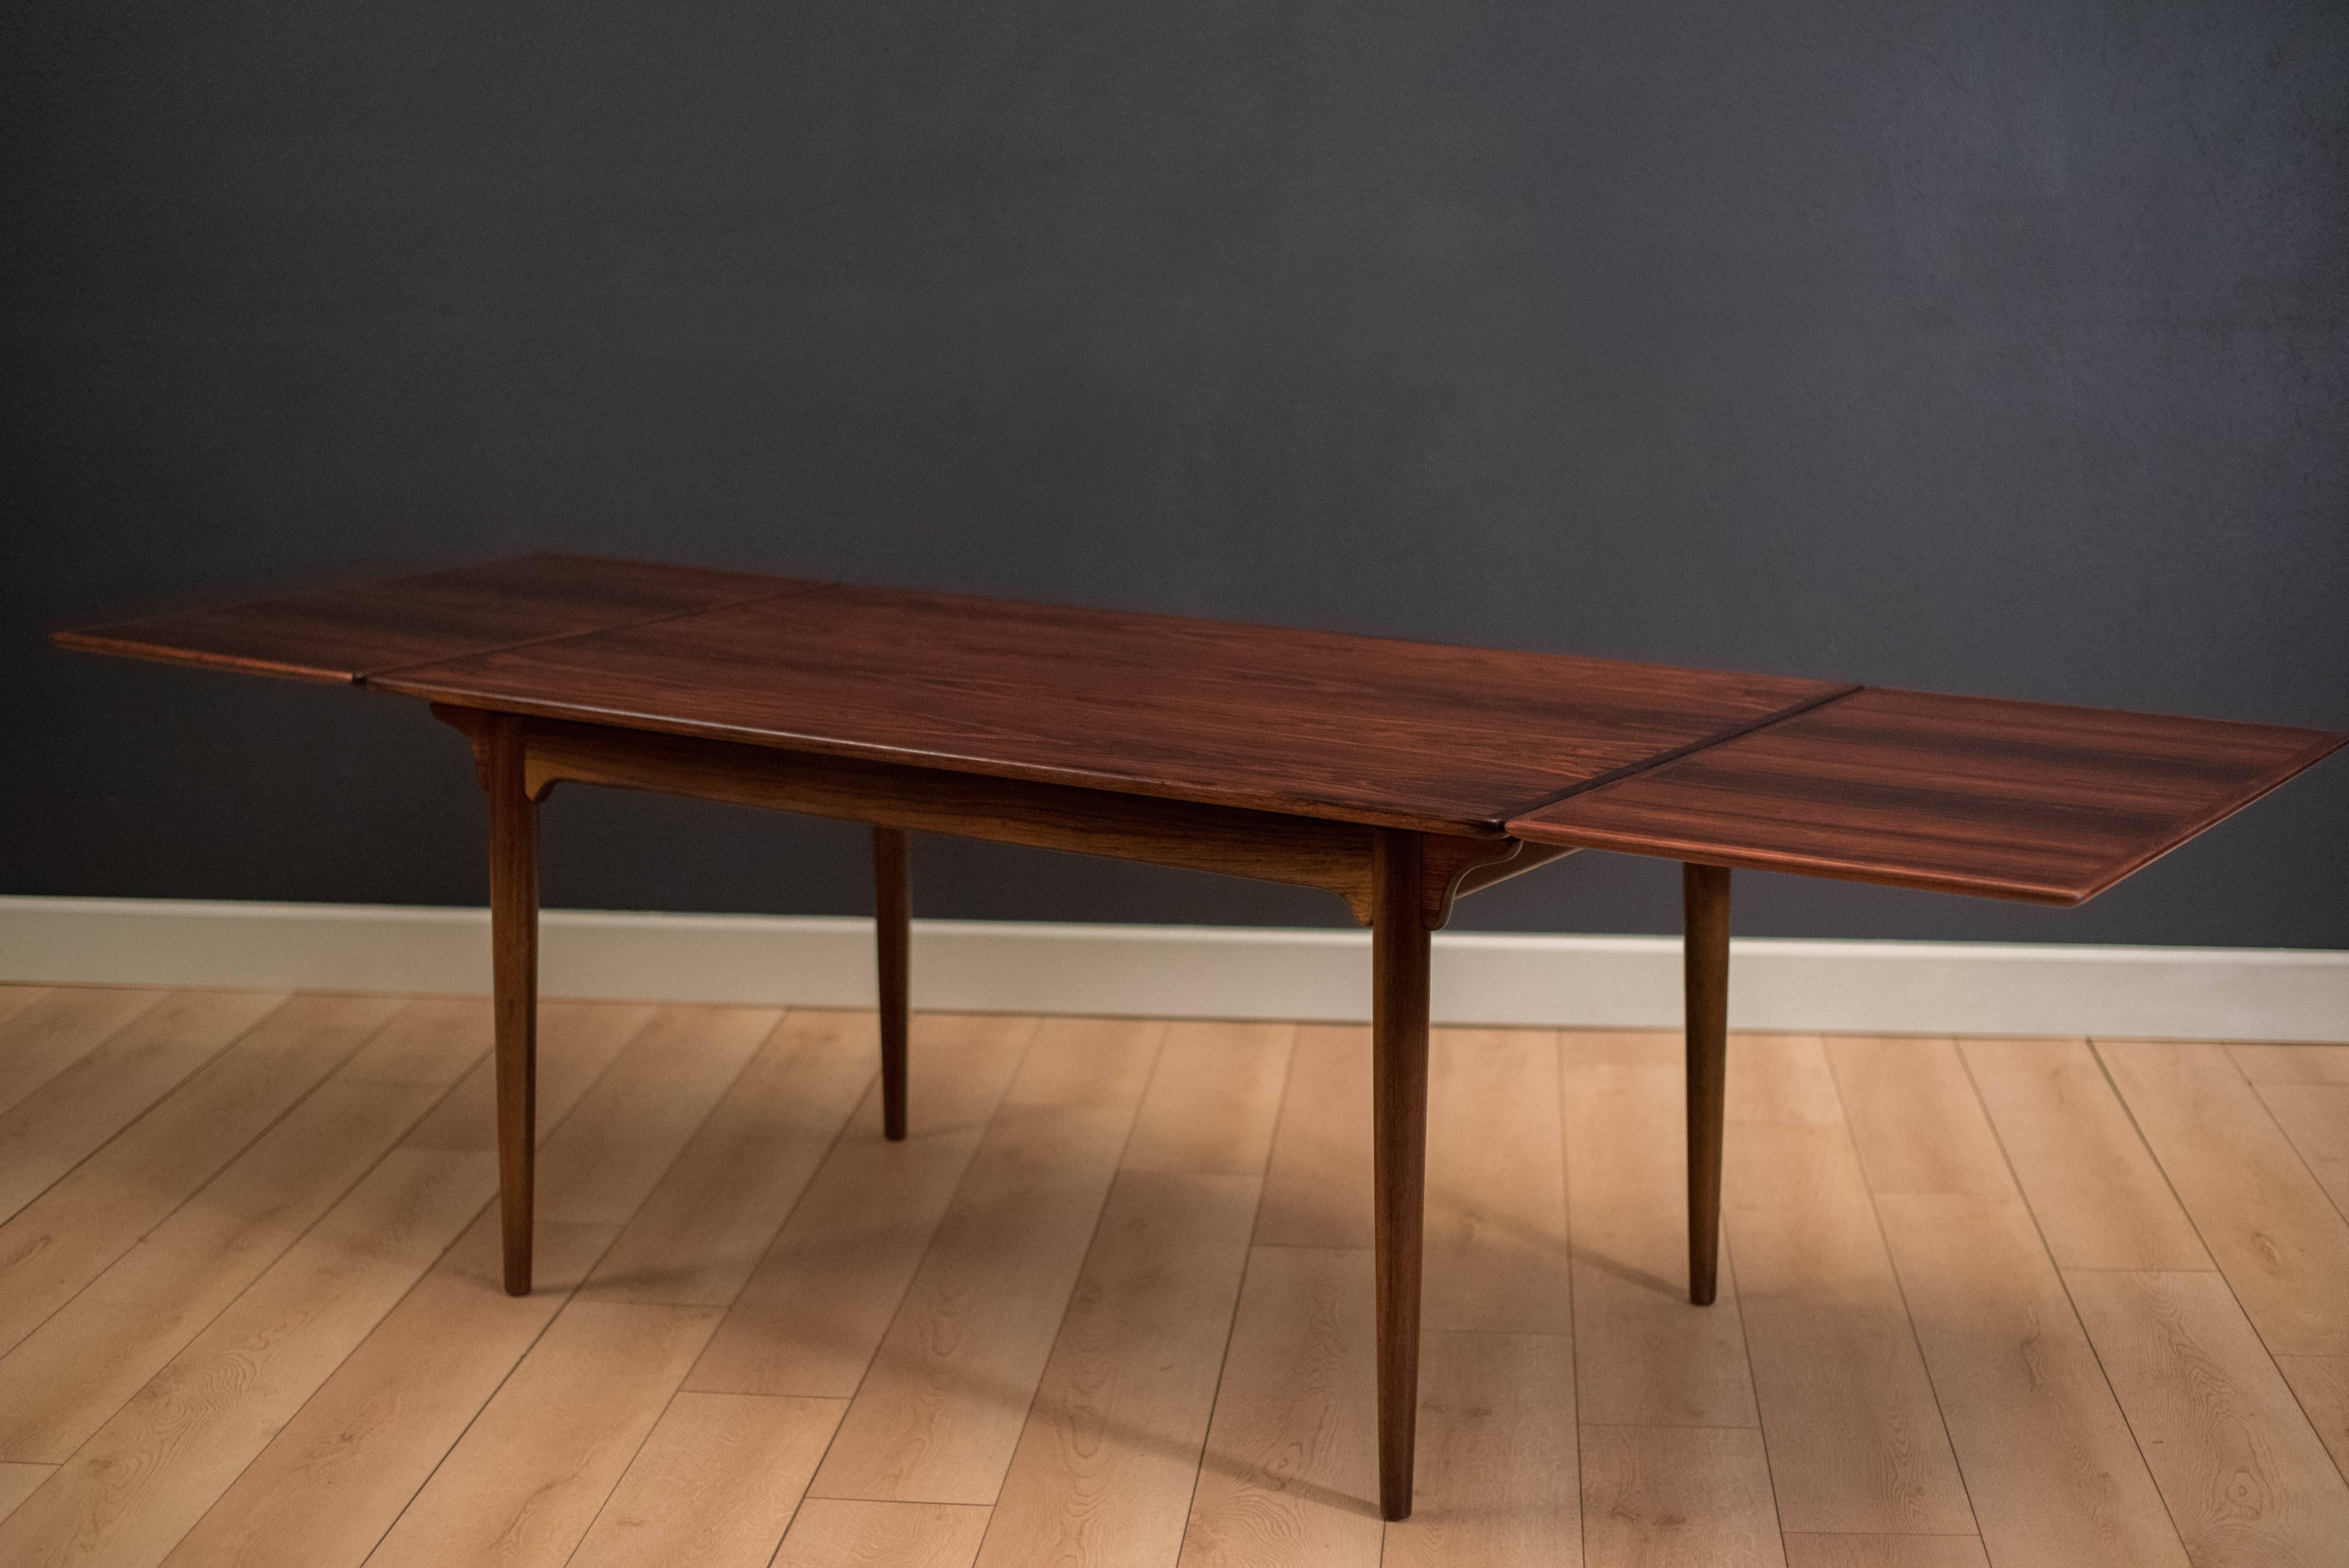 Danish modern rosewood dining table designed by Gunni Omann for Omann Jun Mobelfabrik. This piece features stunning rosewood grains and a unique sculpted base. Table expands with two leaves that tuck underneath when not in use. 

Table measures